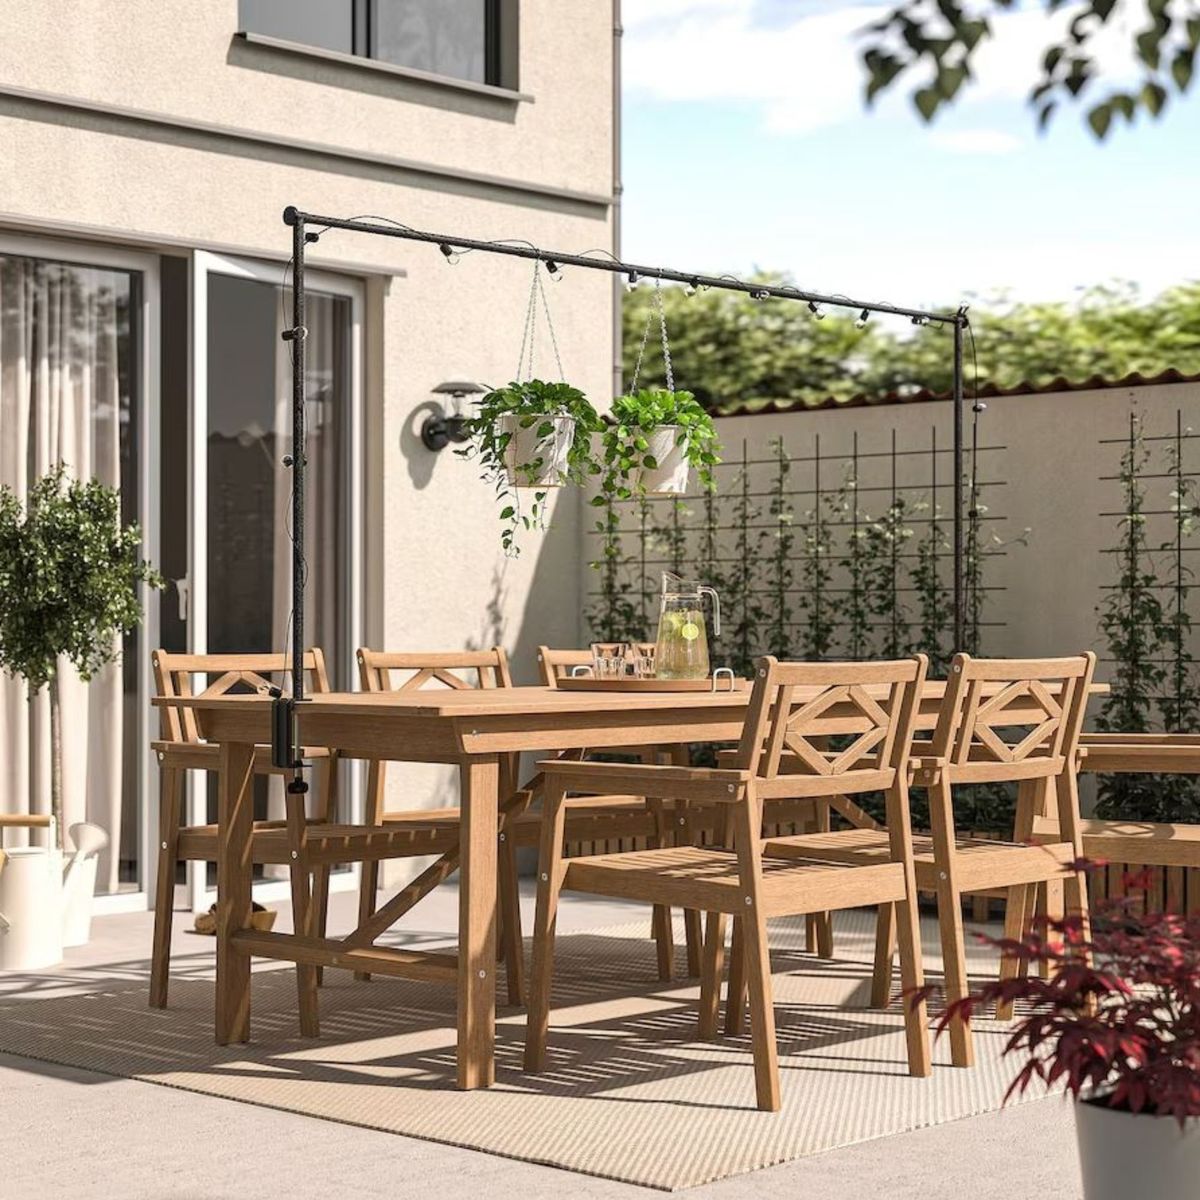 IKEA's new outdoor table includes a clever feature to help add more plants to a small garden